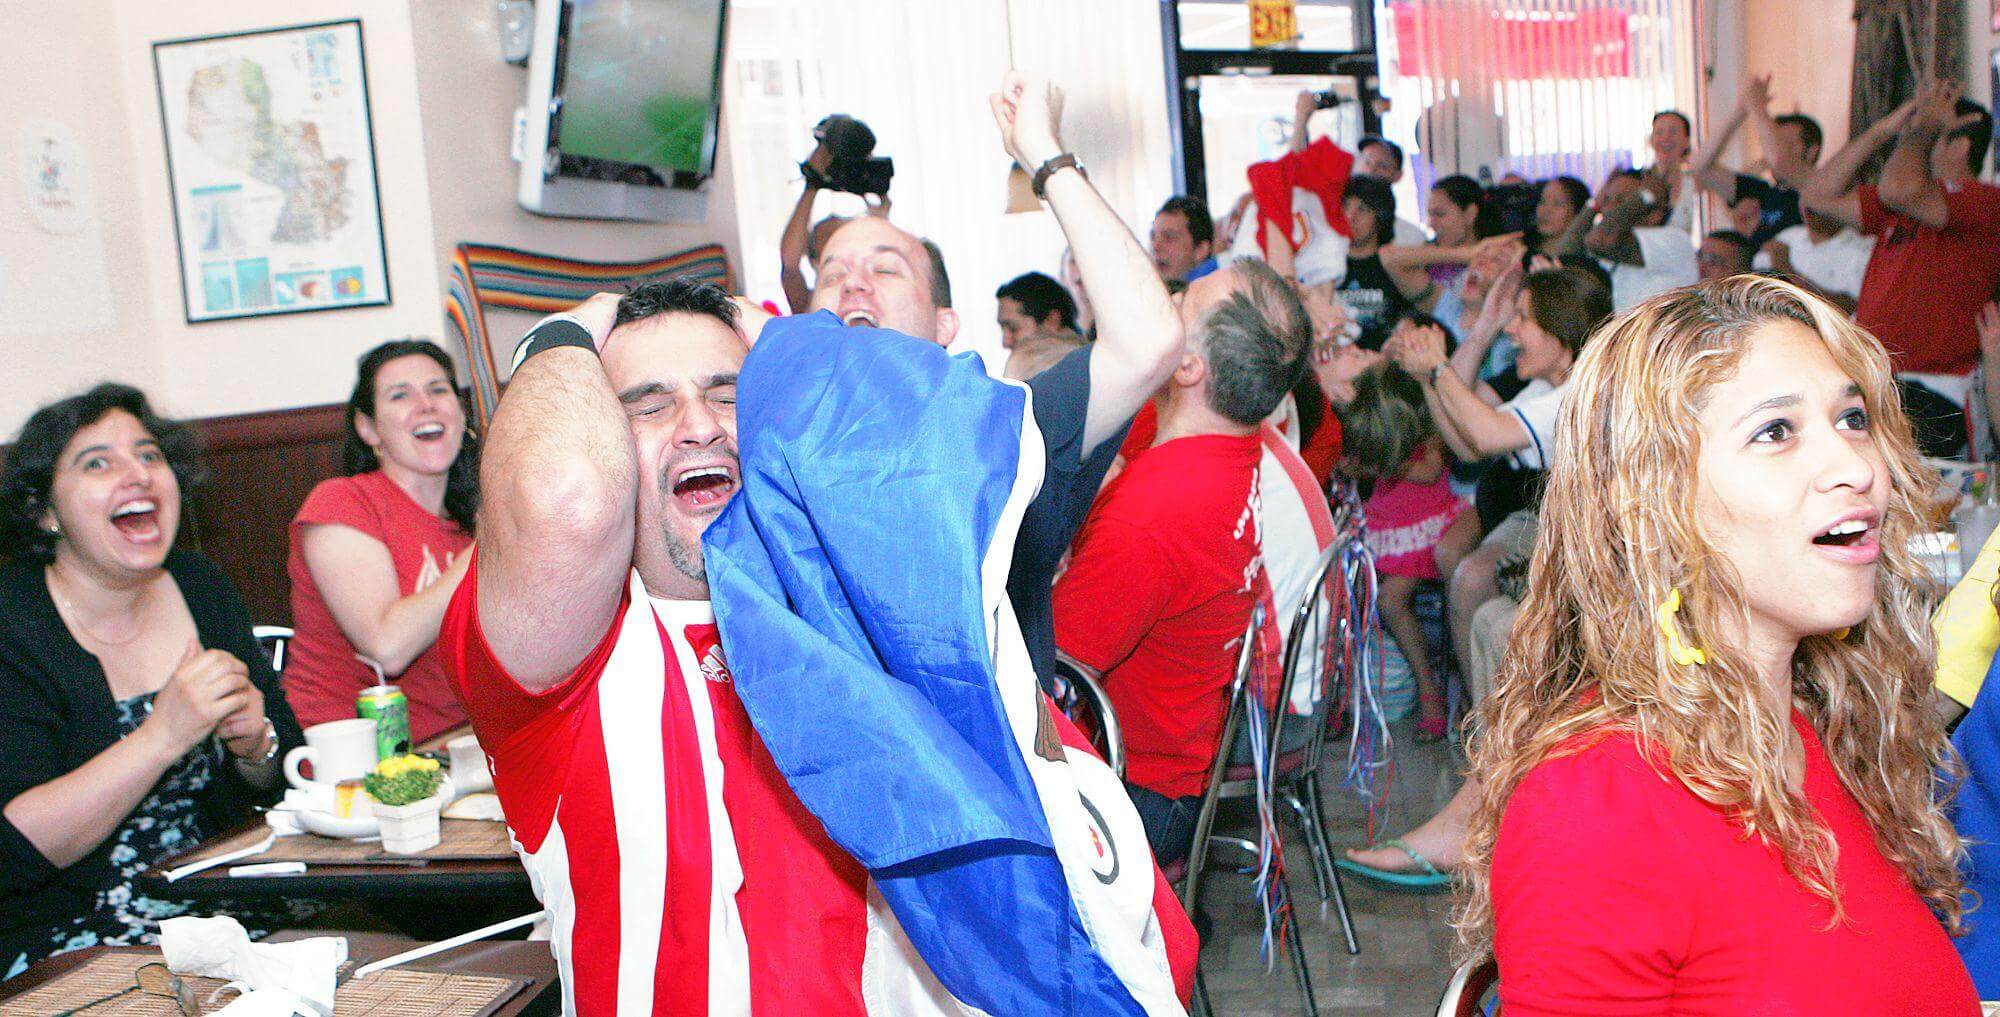 Boro fans of all stripes cheer for World Cup favorites